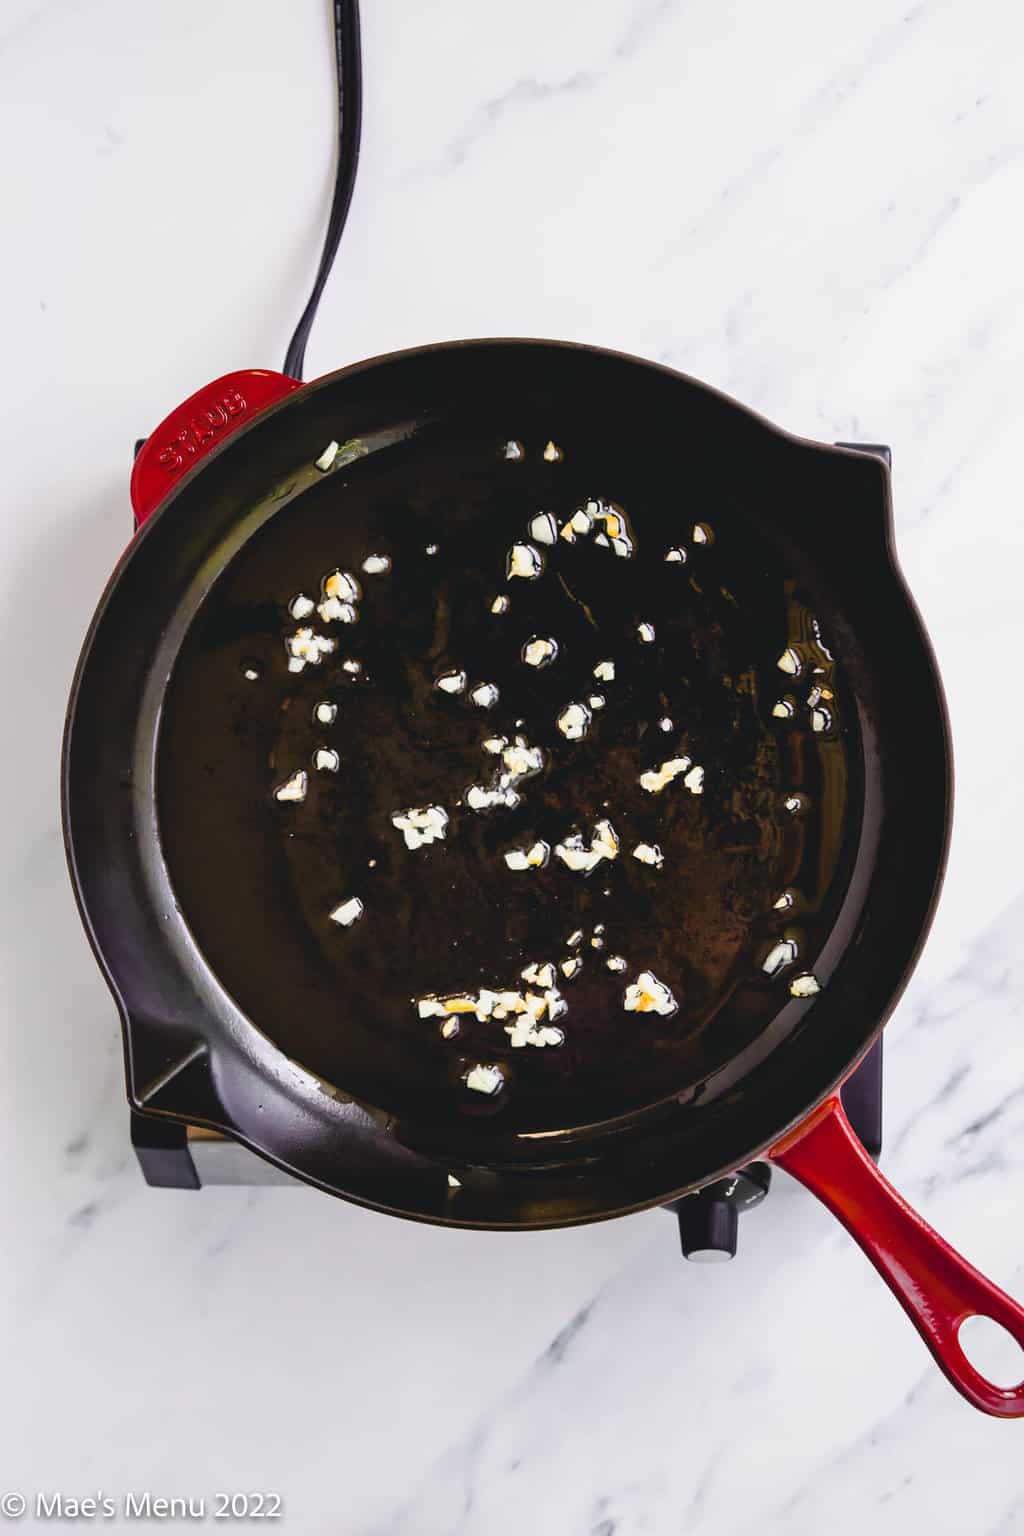 Sauteing garlic in a large red skillet.